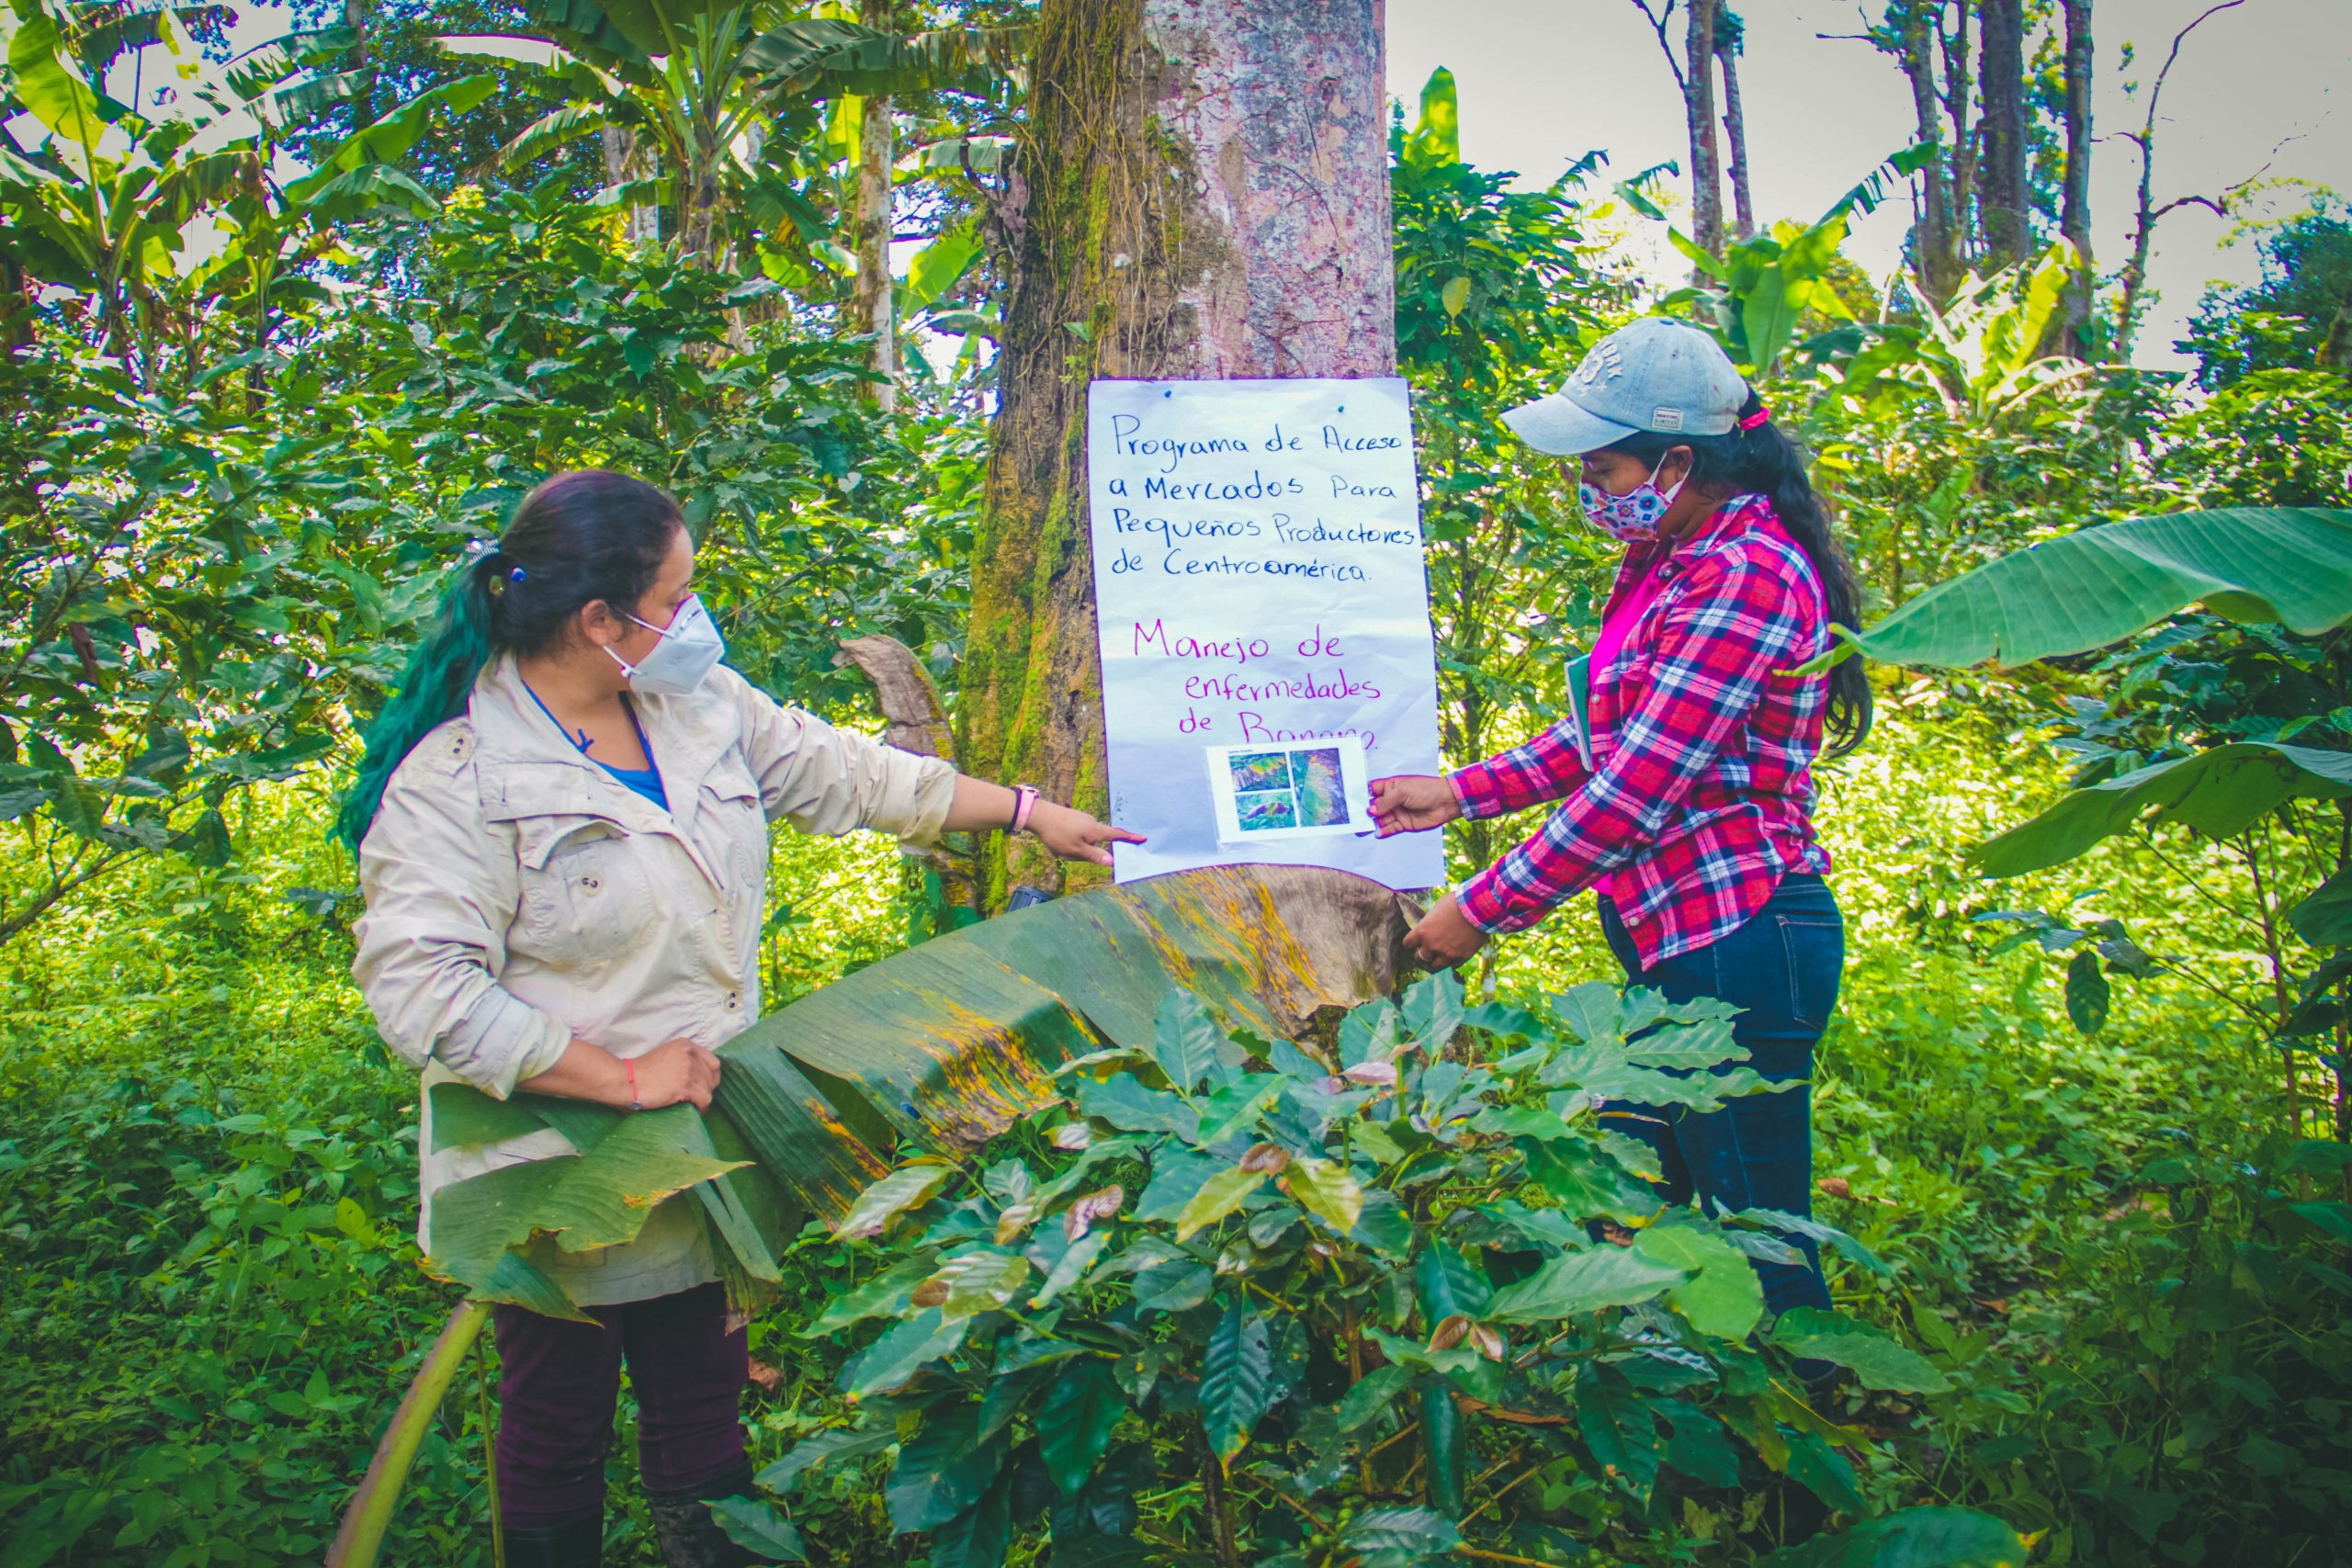 A photo of Rosa Gonzales with another TNS trainer from from TechnoServe’s Smallholder Market Access Program , standing in a densely forested area by coffee and banana trees placing a sign on a tree written in Spanish that says “Programa de acceso a Mercados para pequeños productores de Centroamérica. English translation: “Market access program for small producers in Central America.”The woman on the right is wearing a tan jacket and pants with her hair in a ponytail, while the woman on the right is wearing a red checkered shirt, jeans, and a baseball cap. Both women are wearing masks due to the COVID-19 pandemic and have their hair tied back in a ponytail.